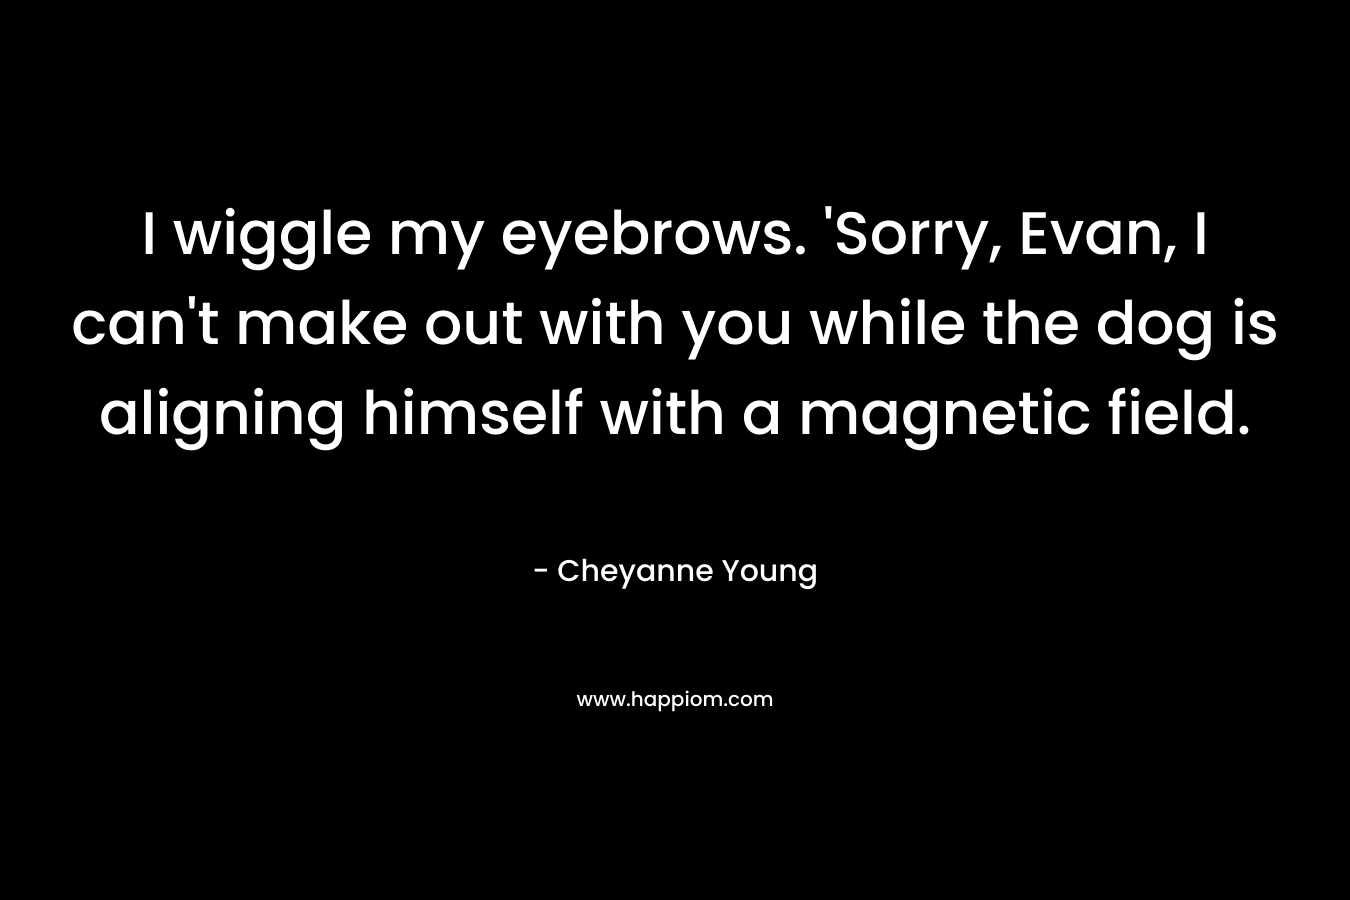 I wiggle my eyebrows. ‘Sorry, Evan, I can’t make out with you while the dog is aligning himself with a magnetic field.  – Cheyanne Young